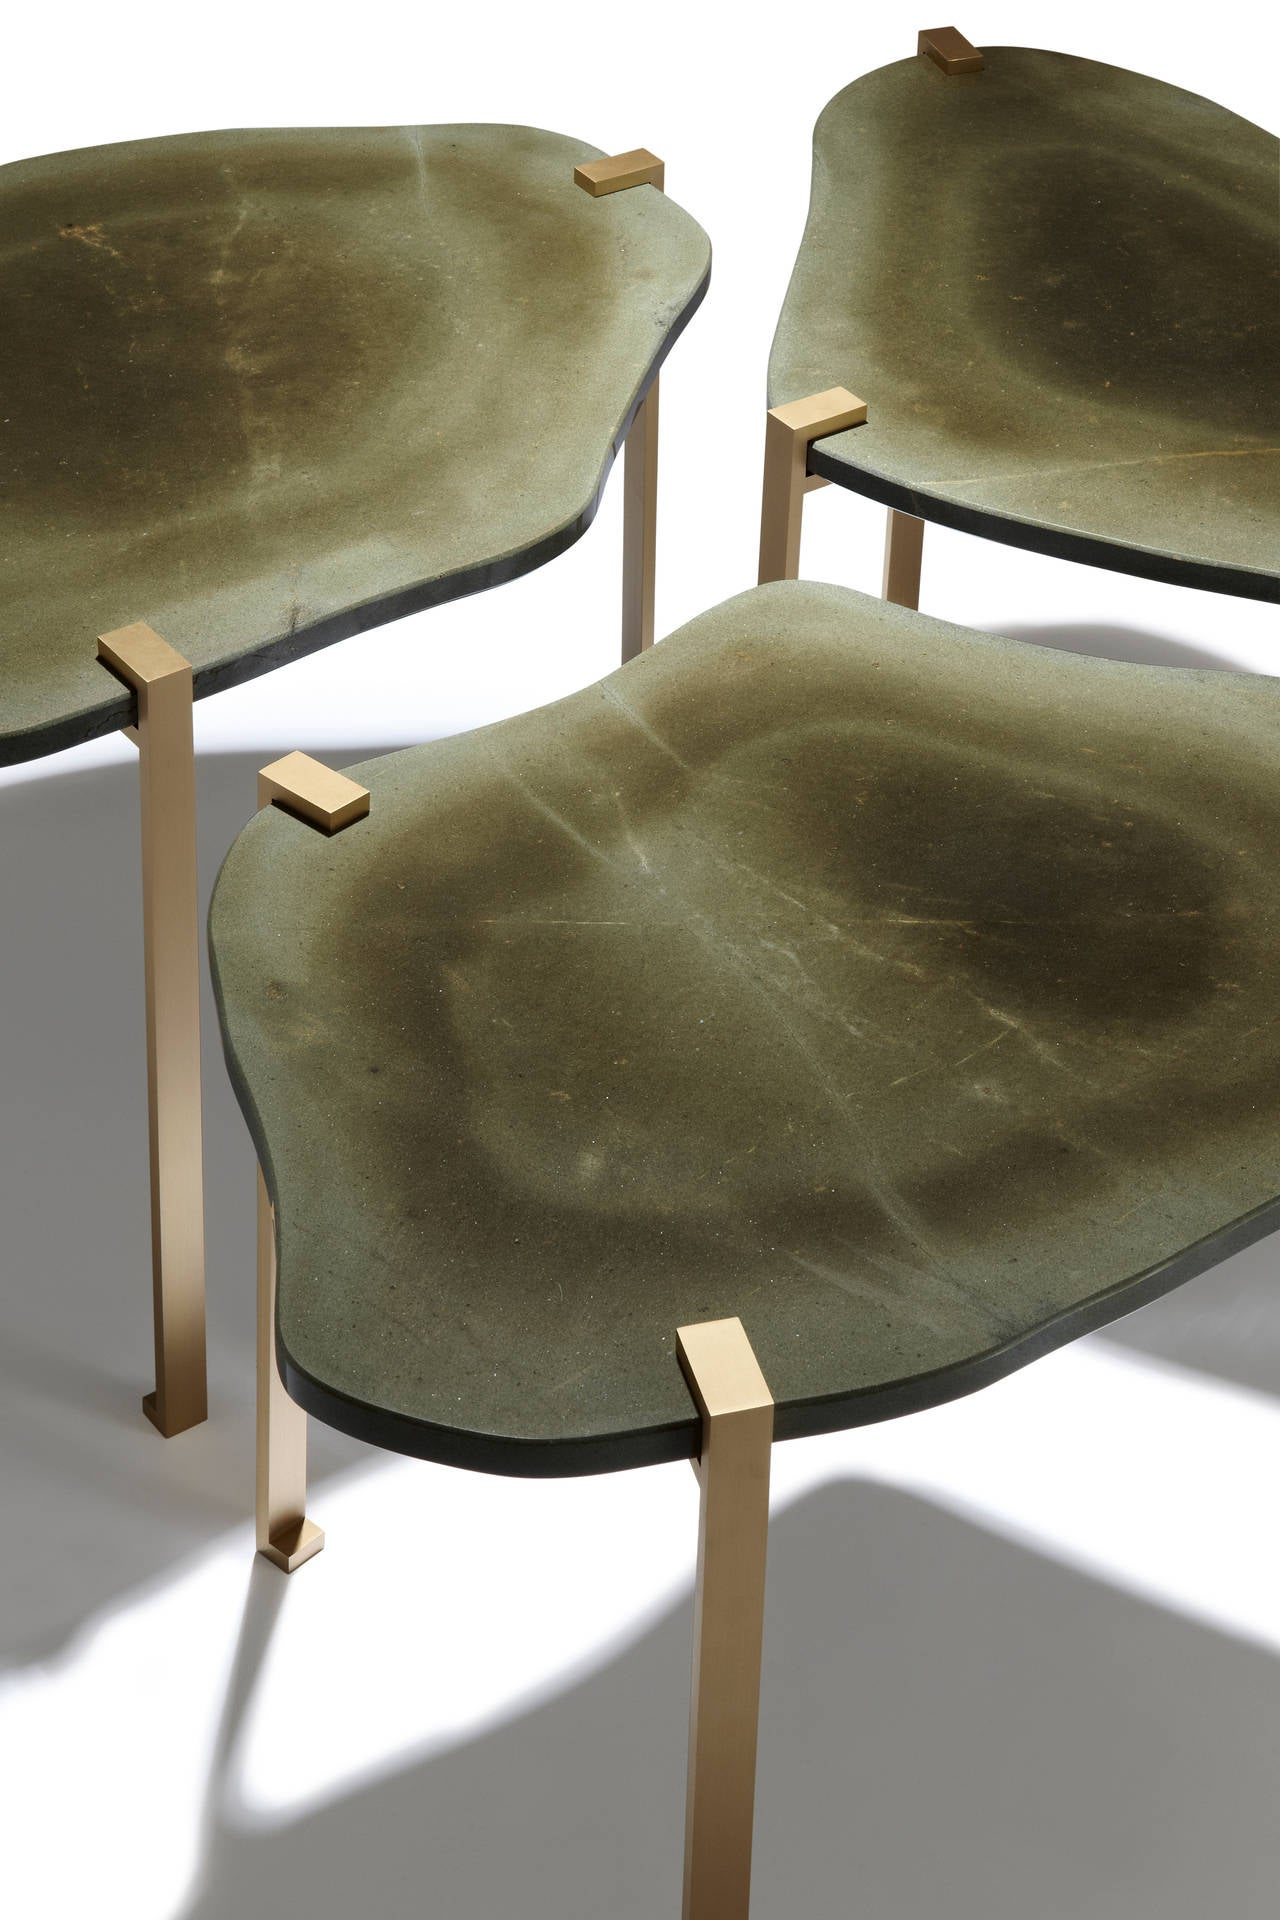 Turtle side tables designed by Hervé Langlais with marble top and satiated brass legs is from the collection Shifting Reflections, presented by Galerie Negropontes. The set is a one-off.

The collection includes some ten furniture designs by Hervé